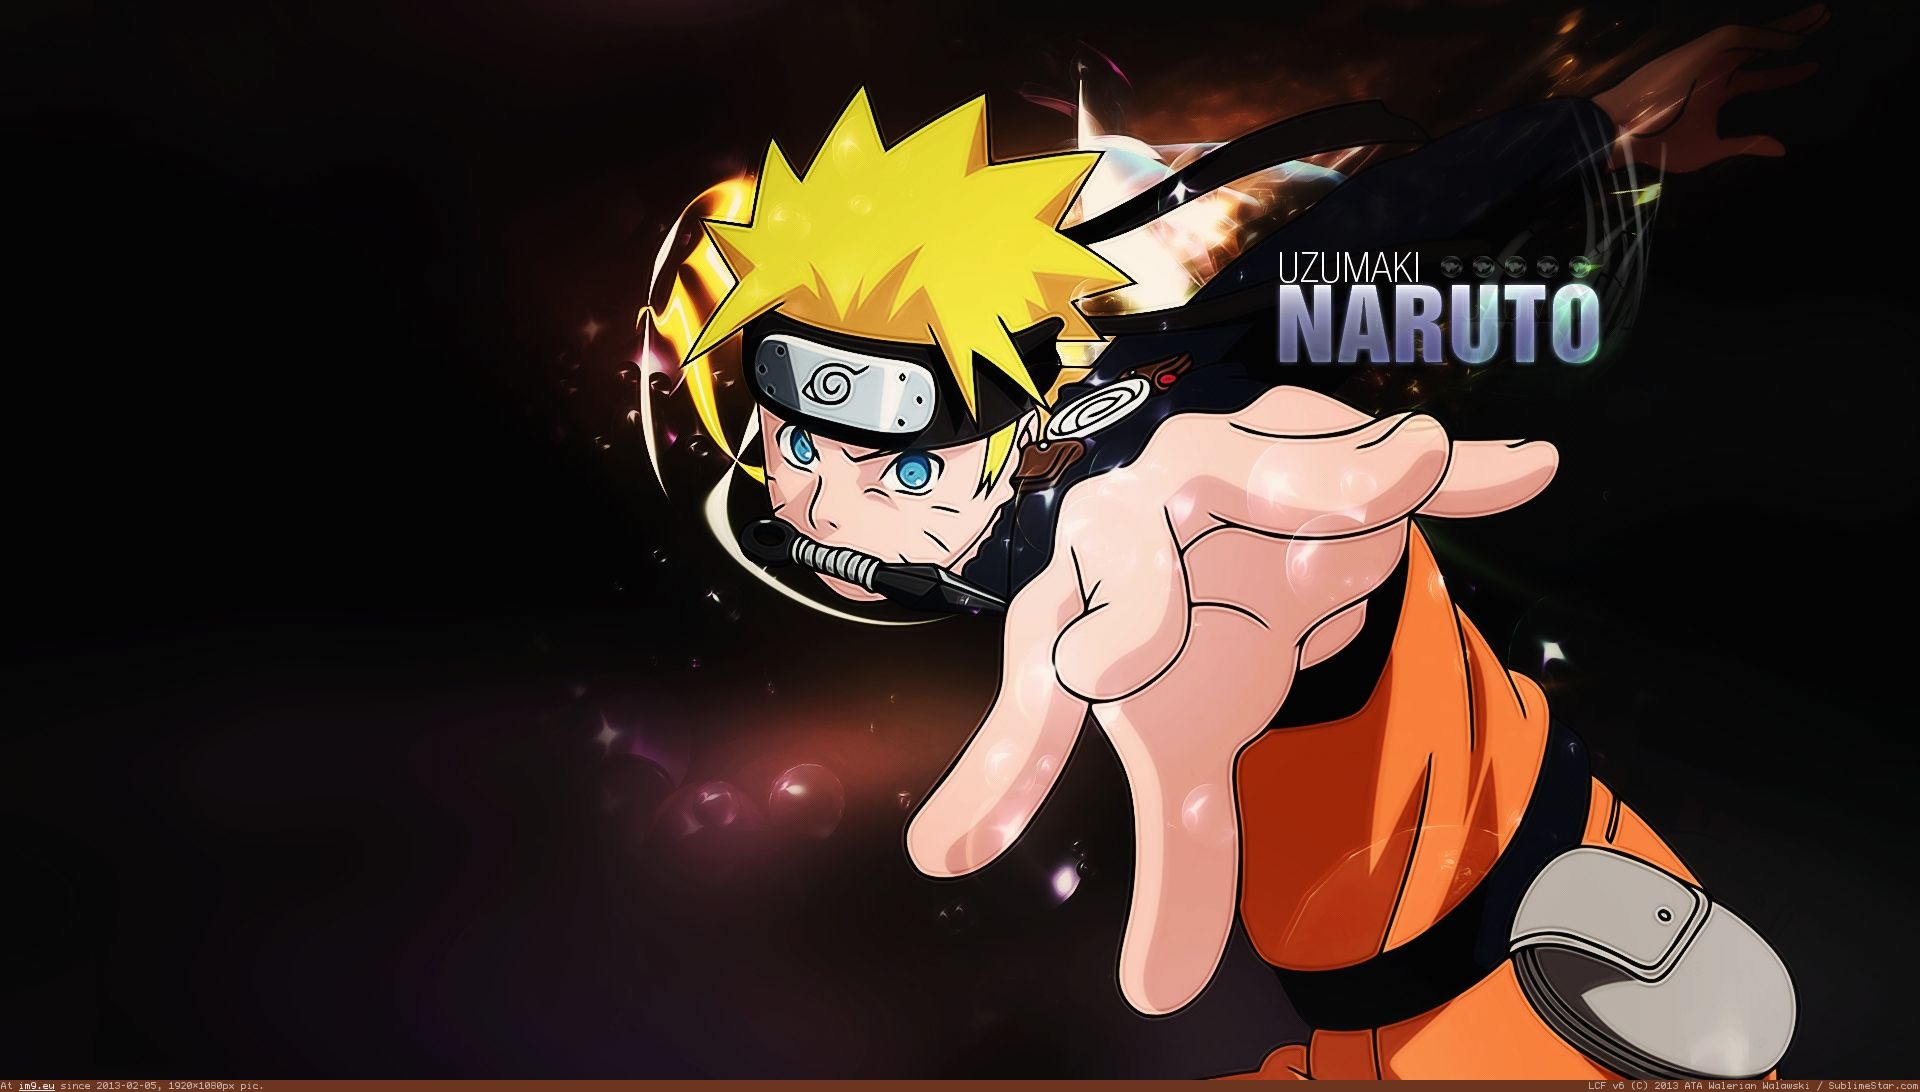 View and Download high-resolution Naruto Shippuden for free. The